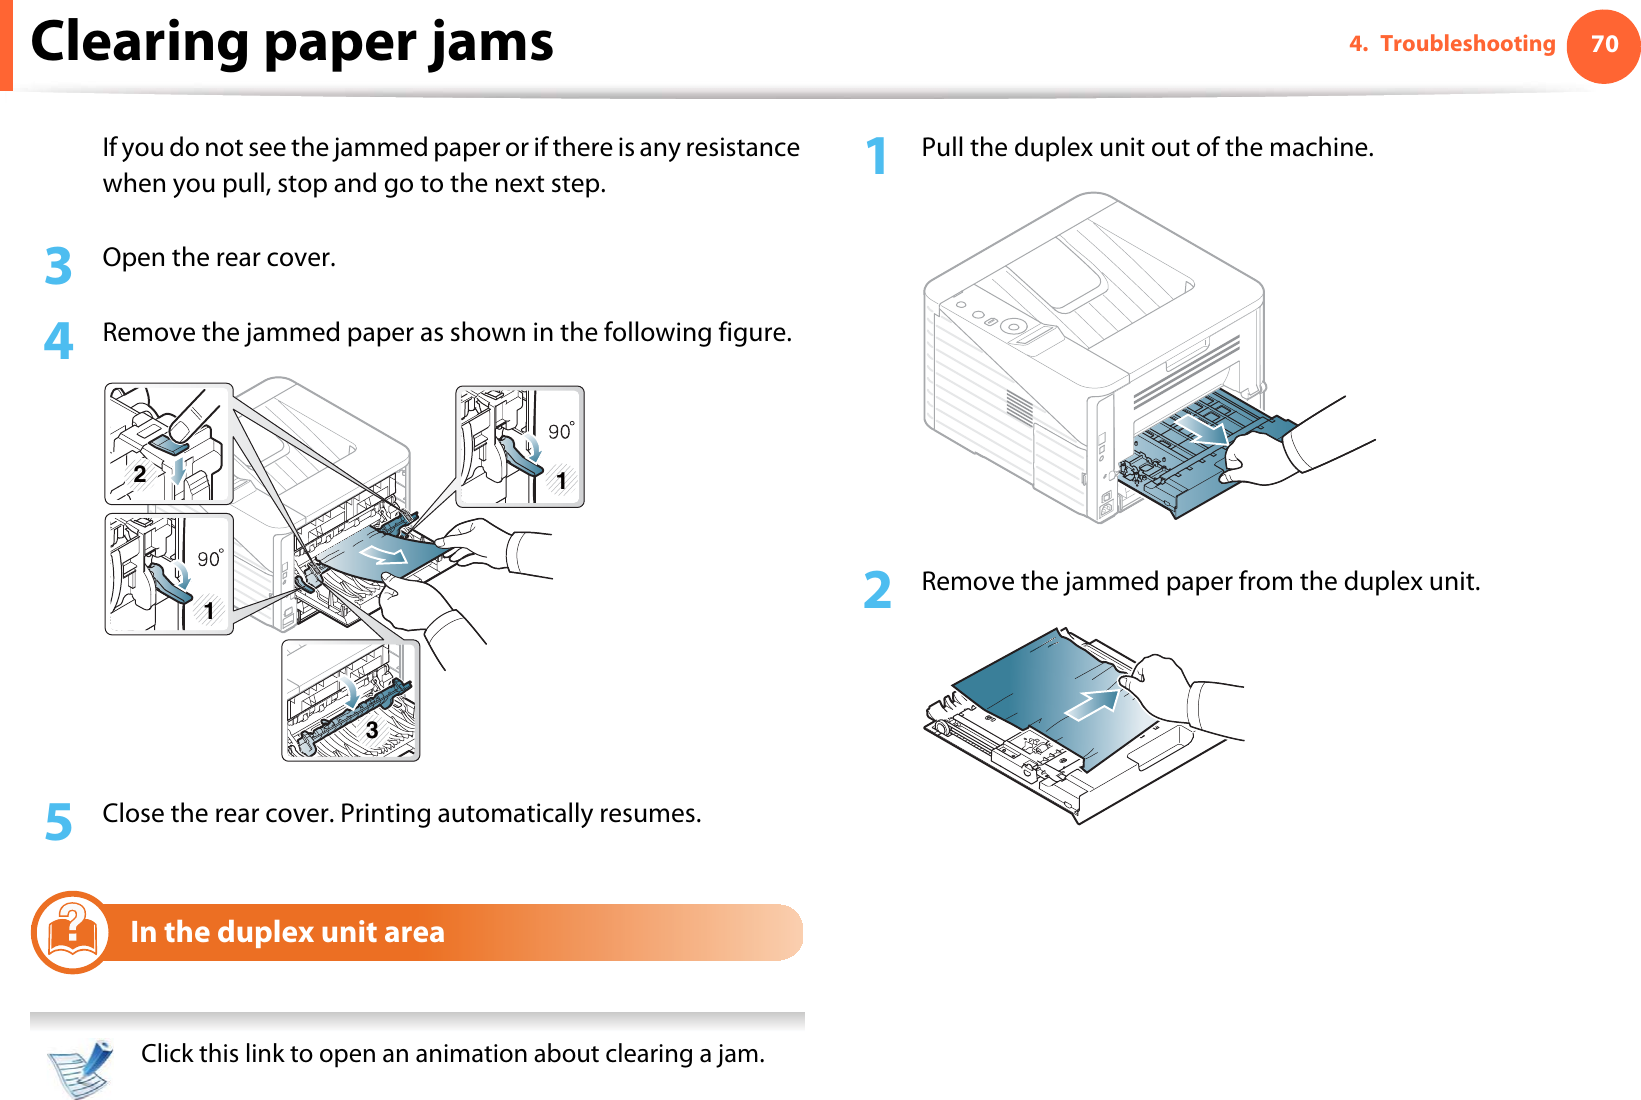 Clearing paper jams 704. TroubleshootingIf you do not see the jammed paper or if there is any resistance when you pull, stop and go to the next step.3  Open the rear cover.4  Remove the jammed paper as shown in the following figure.5  Close the rear cover. Printing automatically resumes.6In the duplex unit area  Click this link to open an animation about clearing a jam. 1Pull the duplex unit out of the machine.2  Remove the jammed paper from the duplex unit.311 3 2